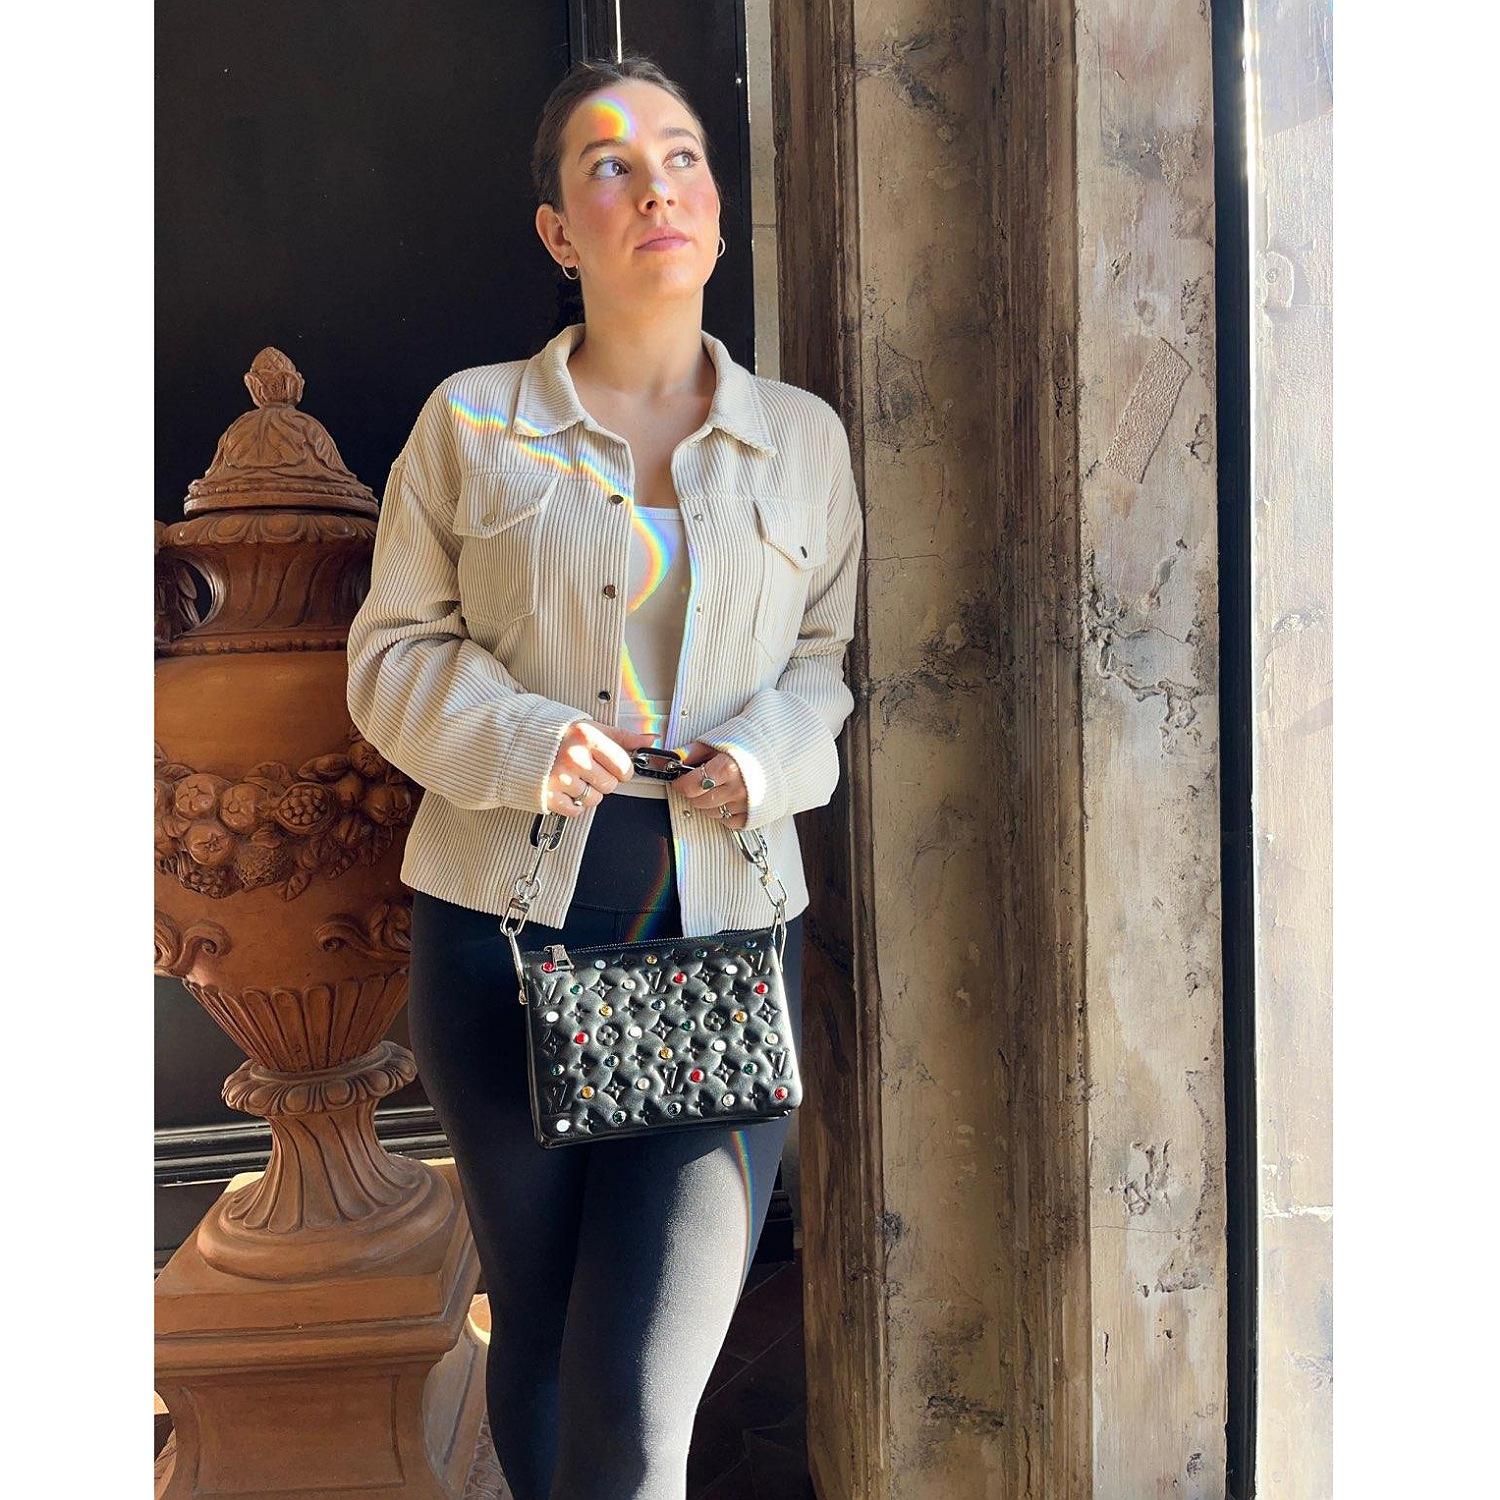 This shoulder bag is crafted of soft lambskin leather embossed in black. with embellished multicolored crystals throughout the exterior. The bag features a silver chain strap, an optional leather shoulder strap, and silver hardware. The top zipper